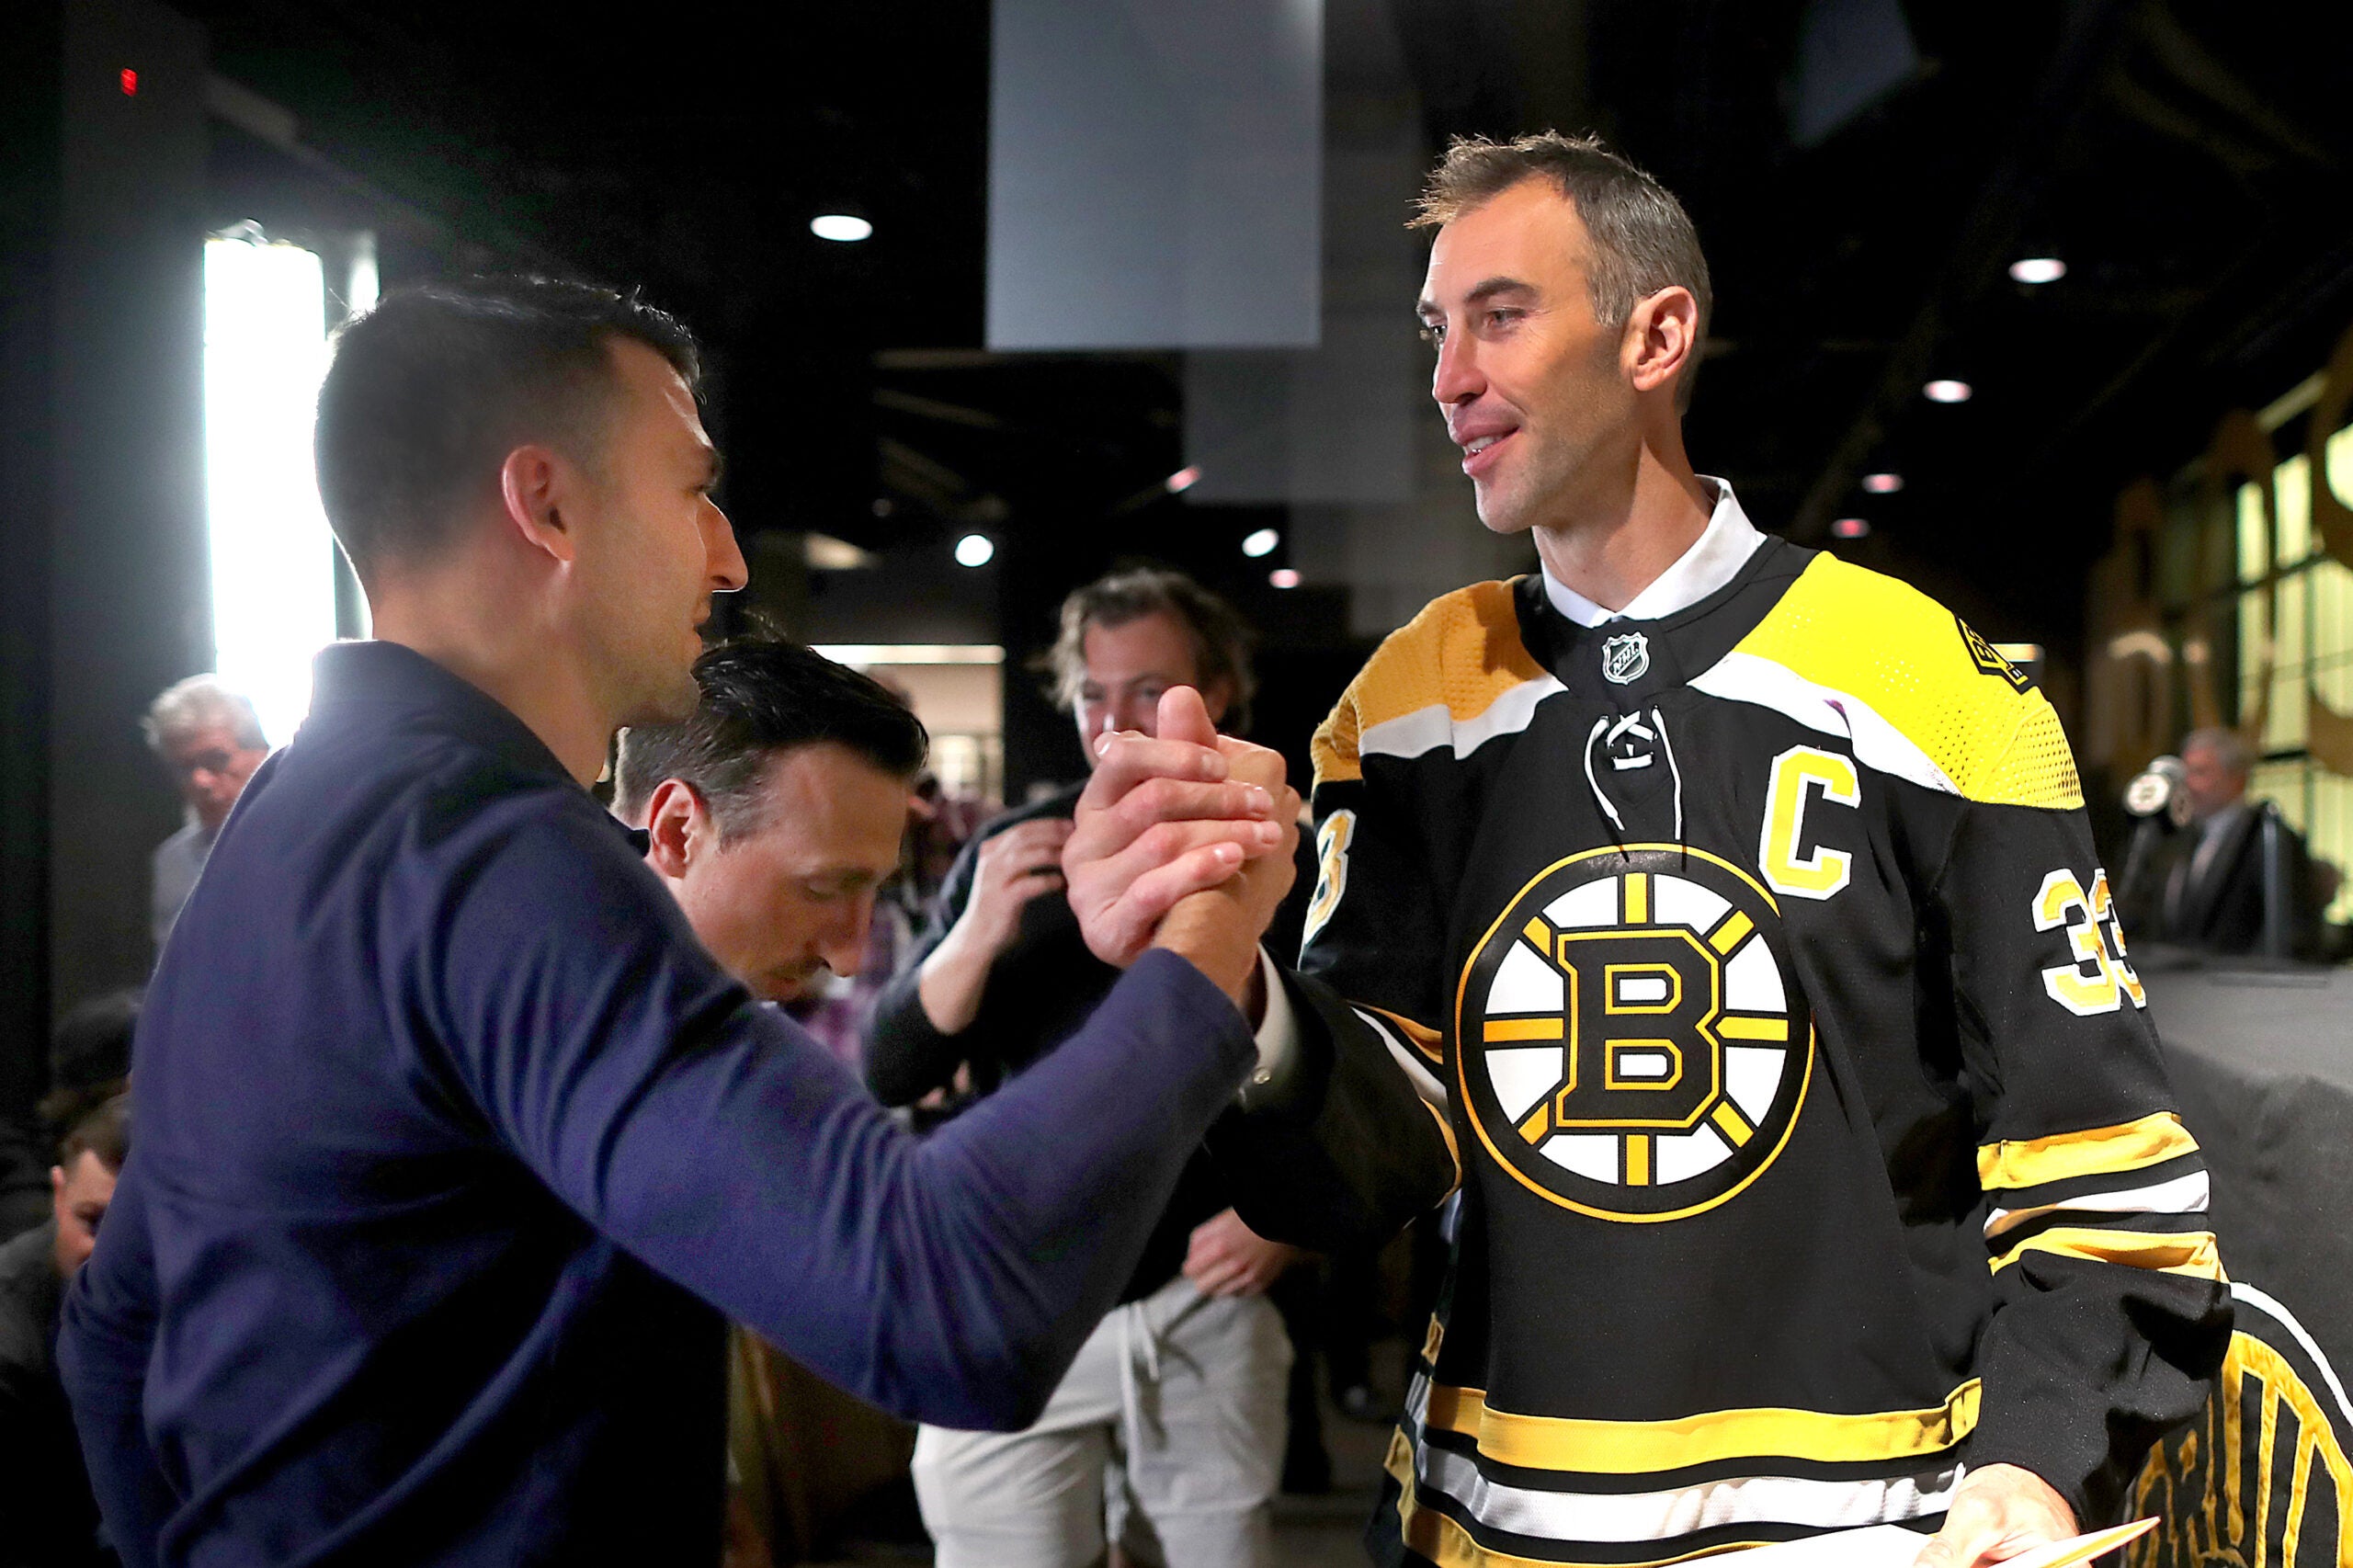 Patrice Bergeron (left) congratulates Bruins Zdeno Chara after Chara held a press conference at TD Garden to announce his retirement after he signed a one-day contract with the team to retire form the Bruins and the NHL.